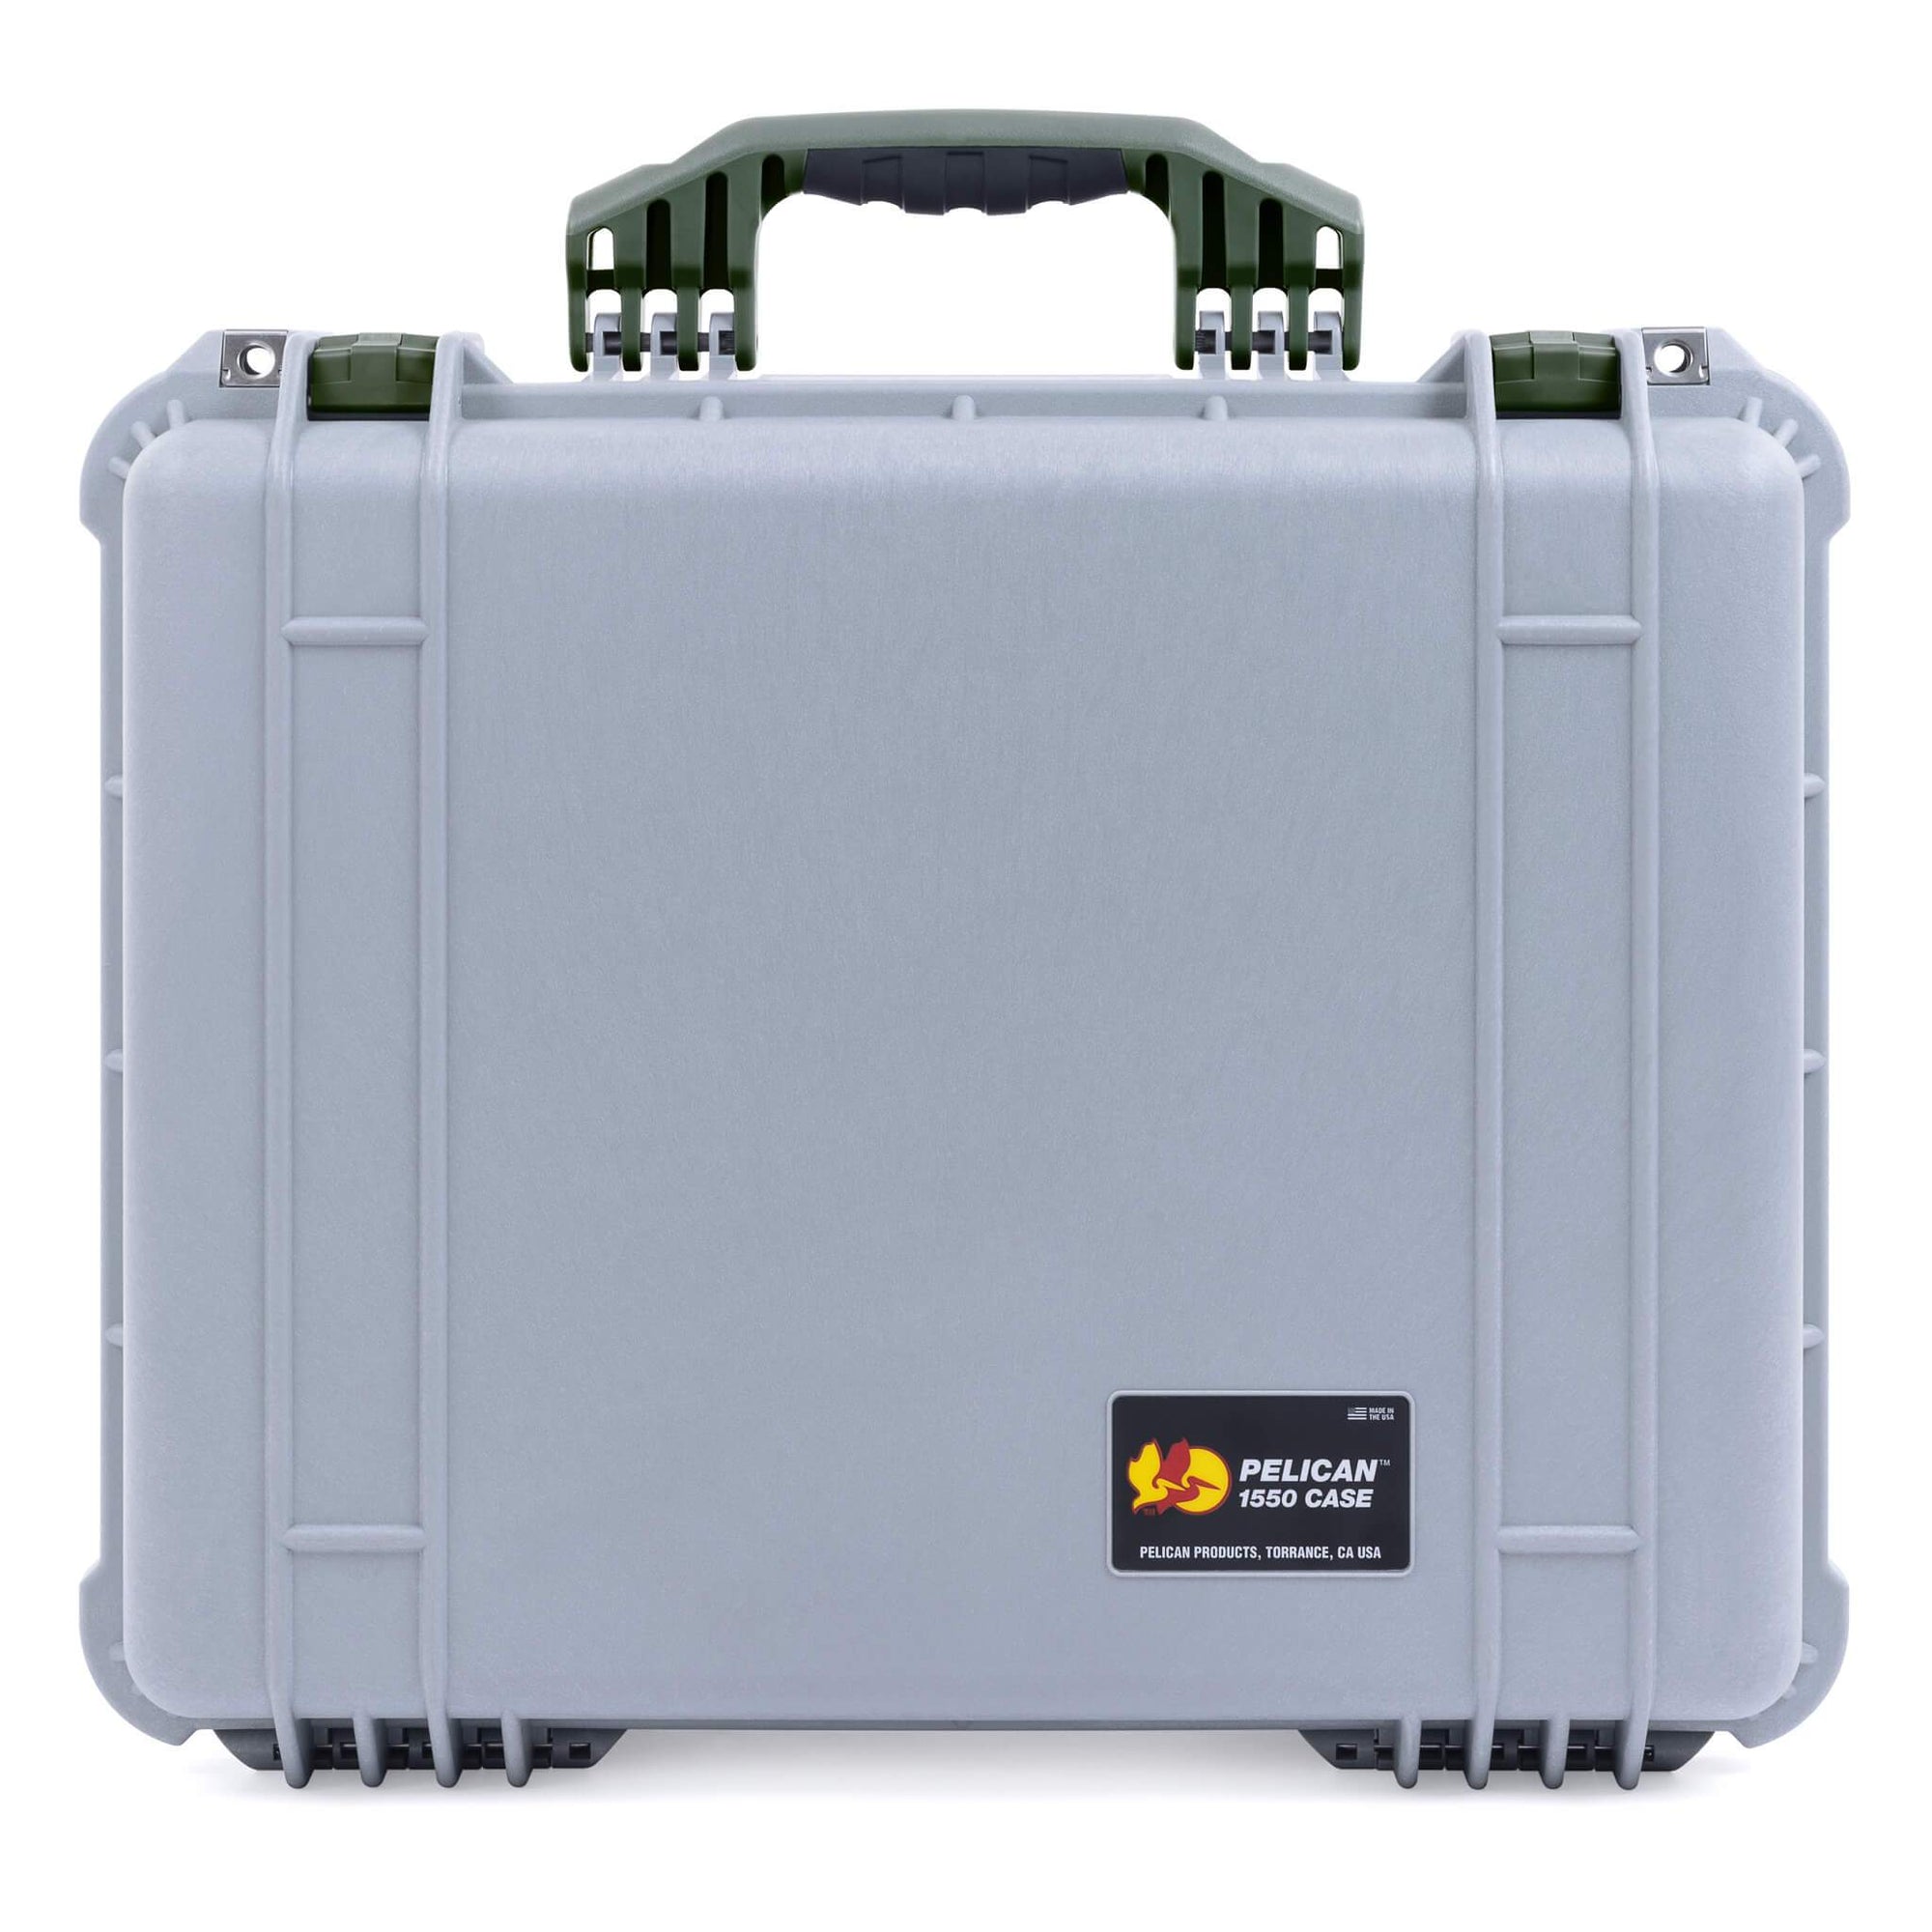 Pelican 1550 Case, Silver with OD Green Handle & Latches ColorCase 